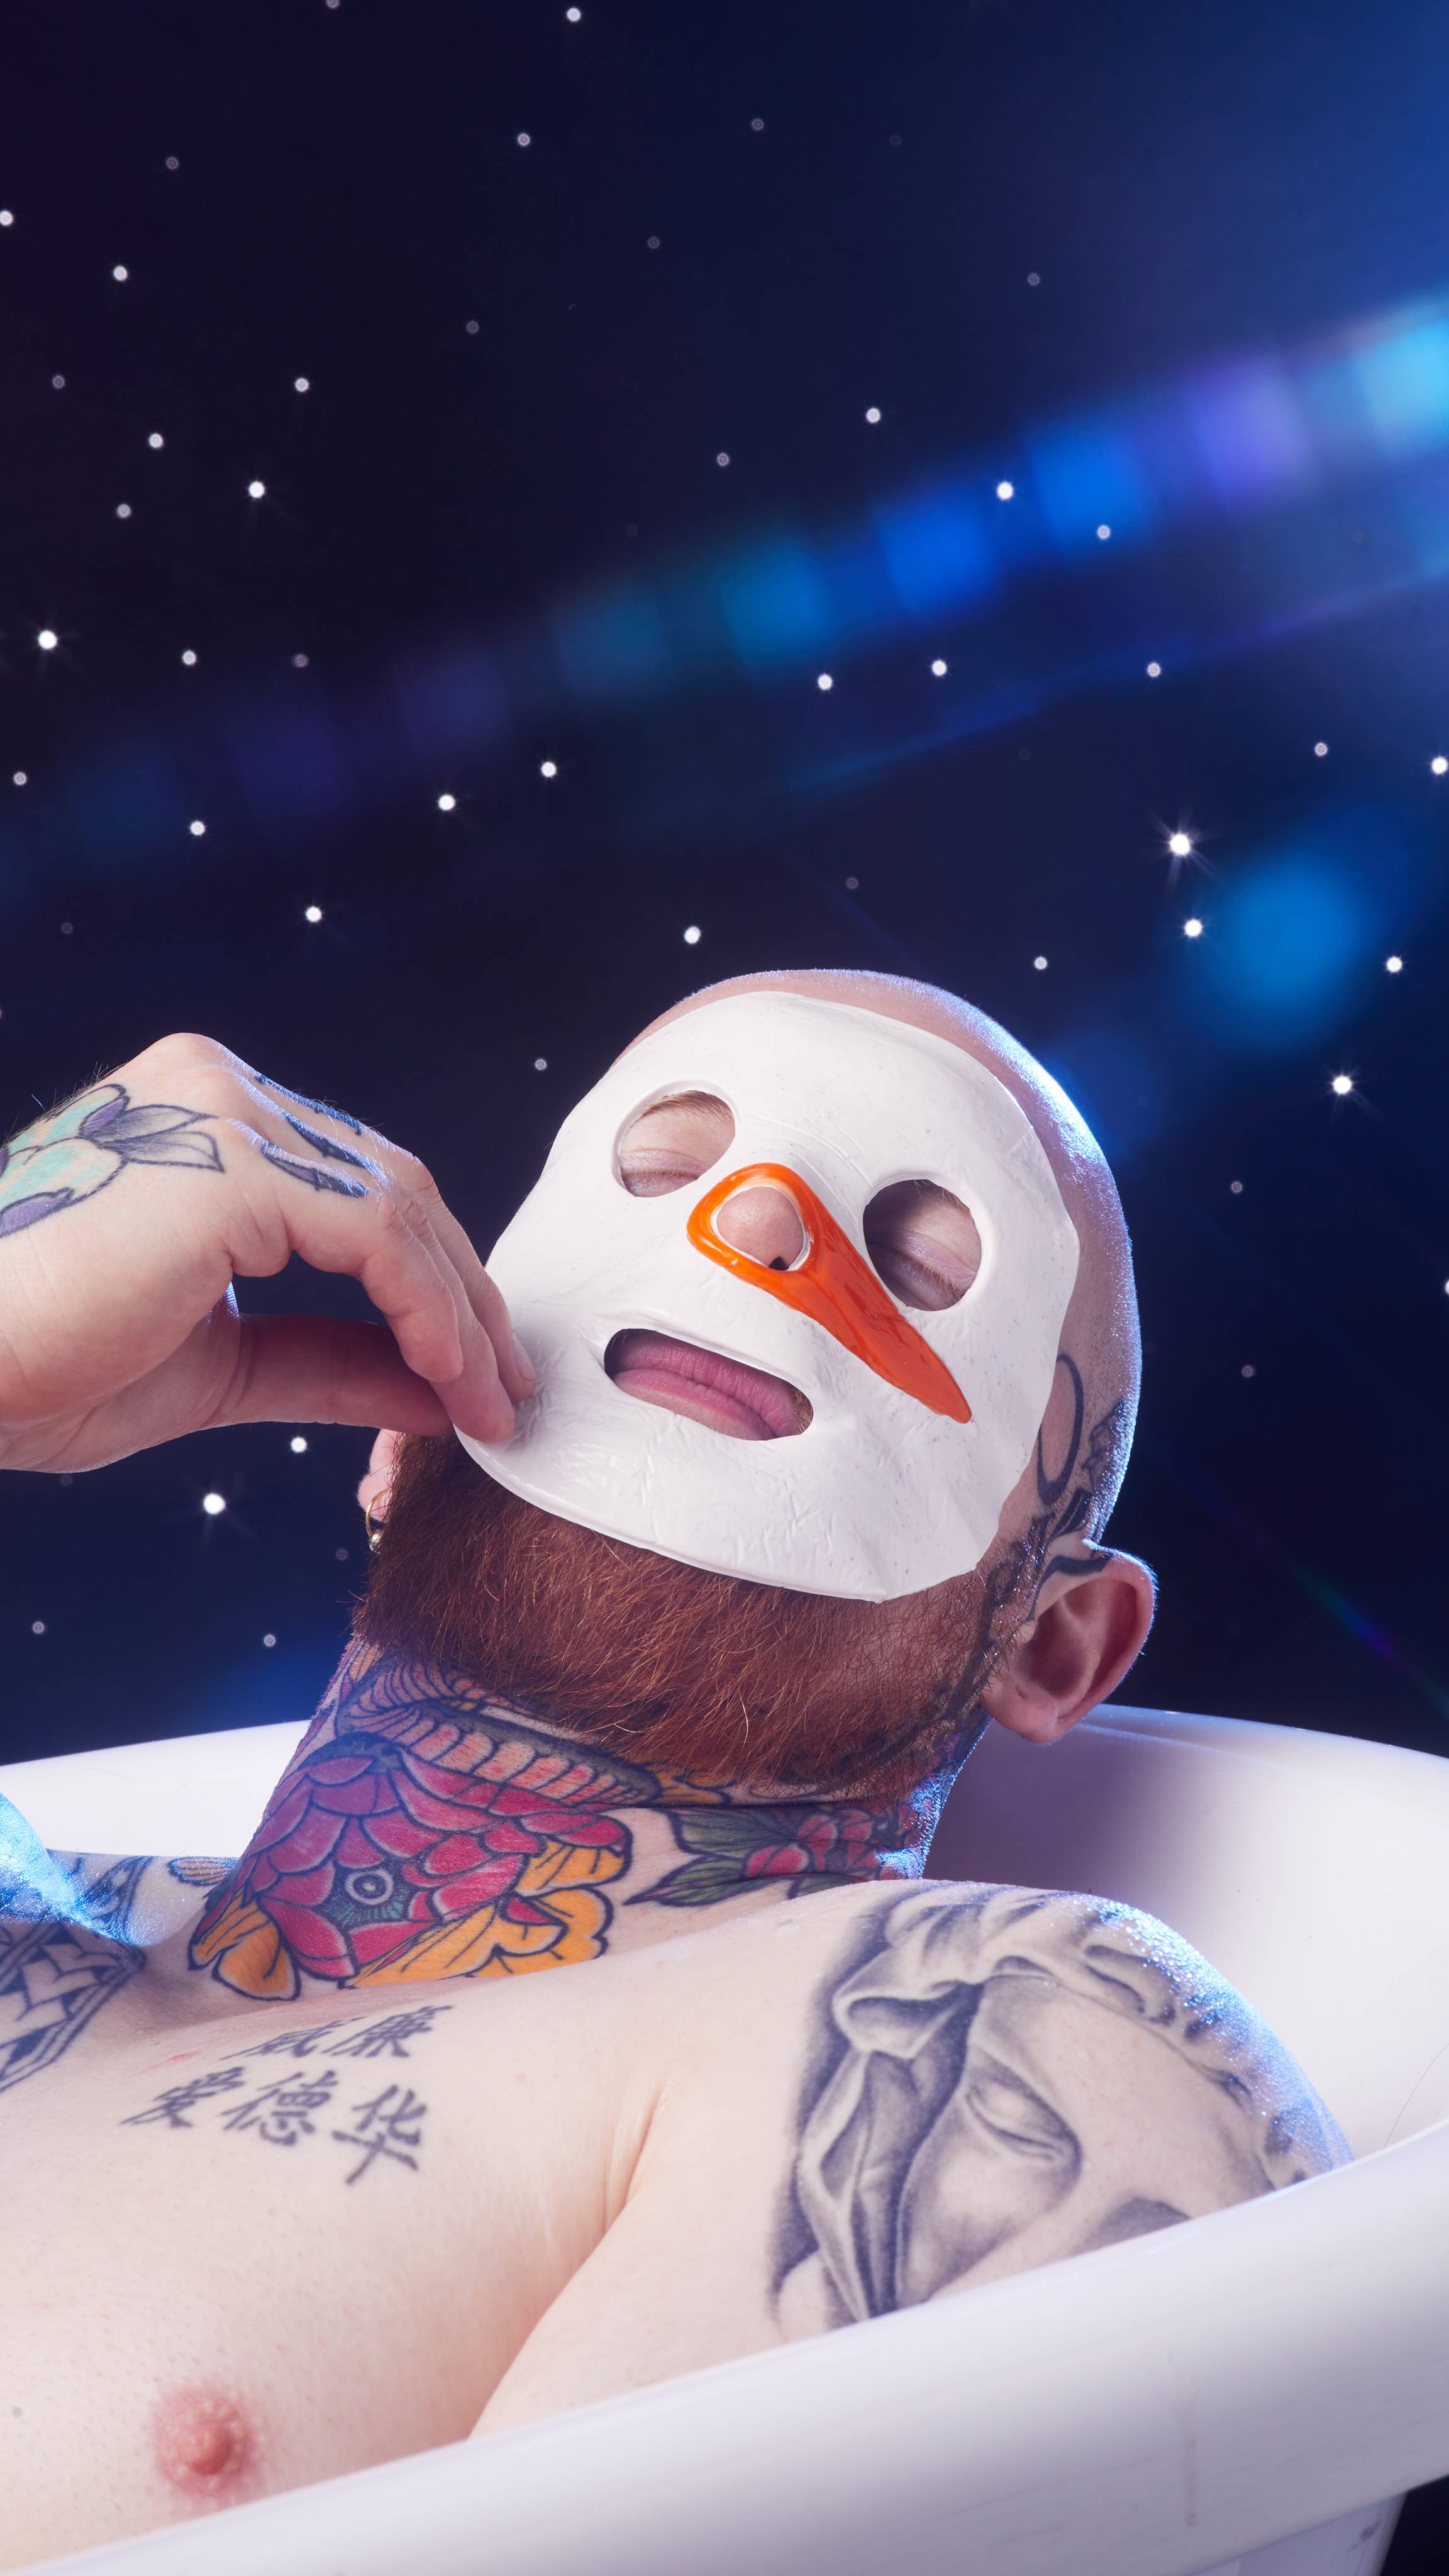 The model lays in a bathtub on a starry background positioning the Snowman sheet mask gently on their face.